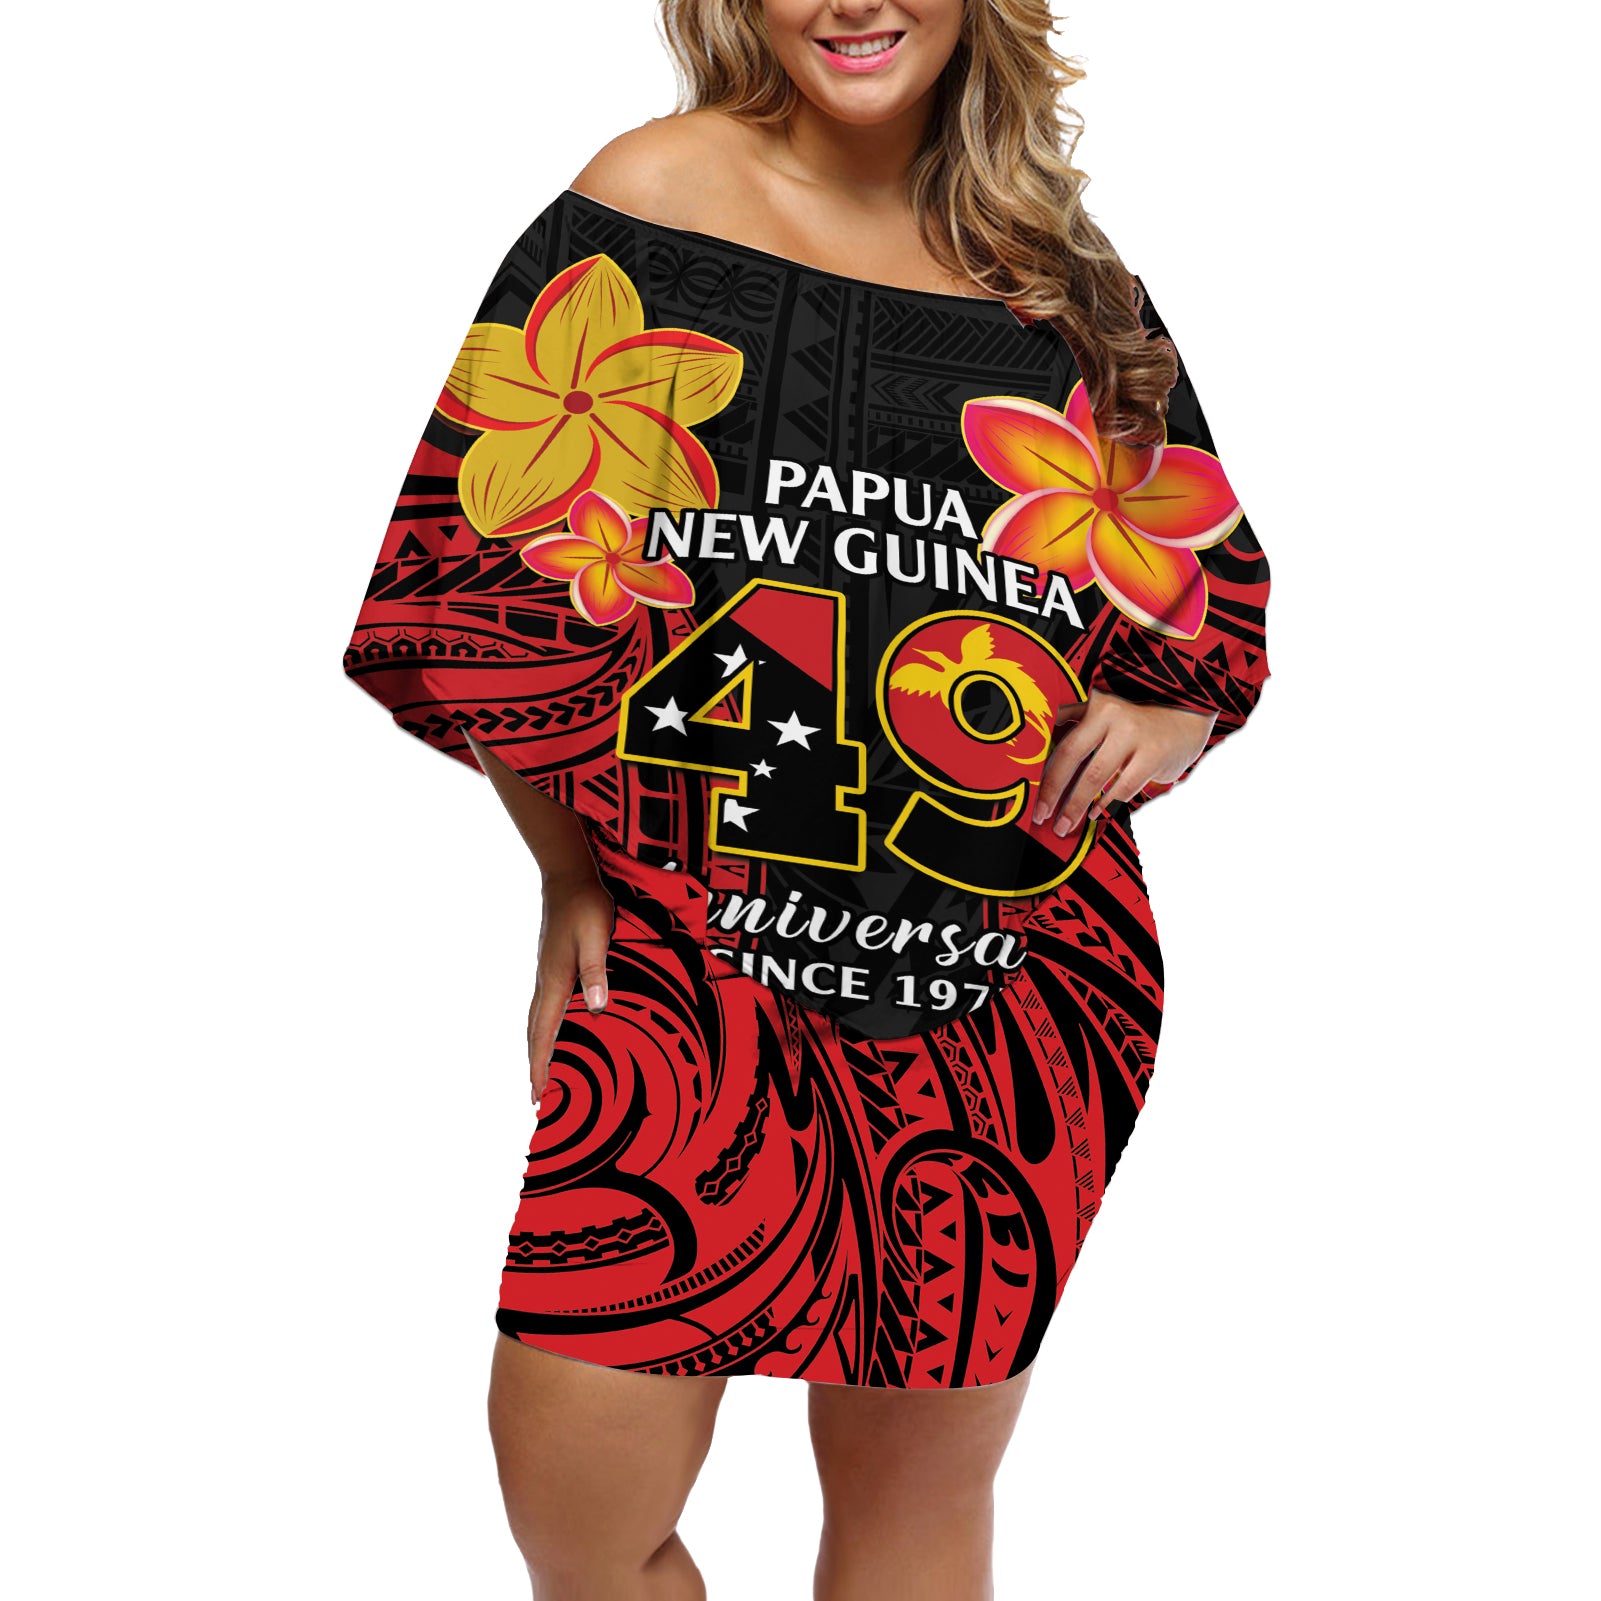 Papua New Guinea Independence Day Off Shoulder Short Dress PNG Since 1975